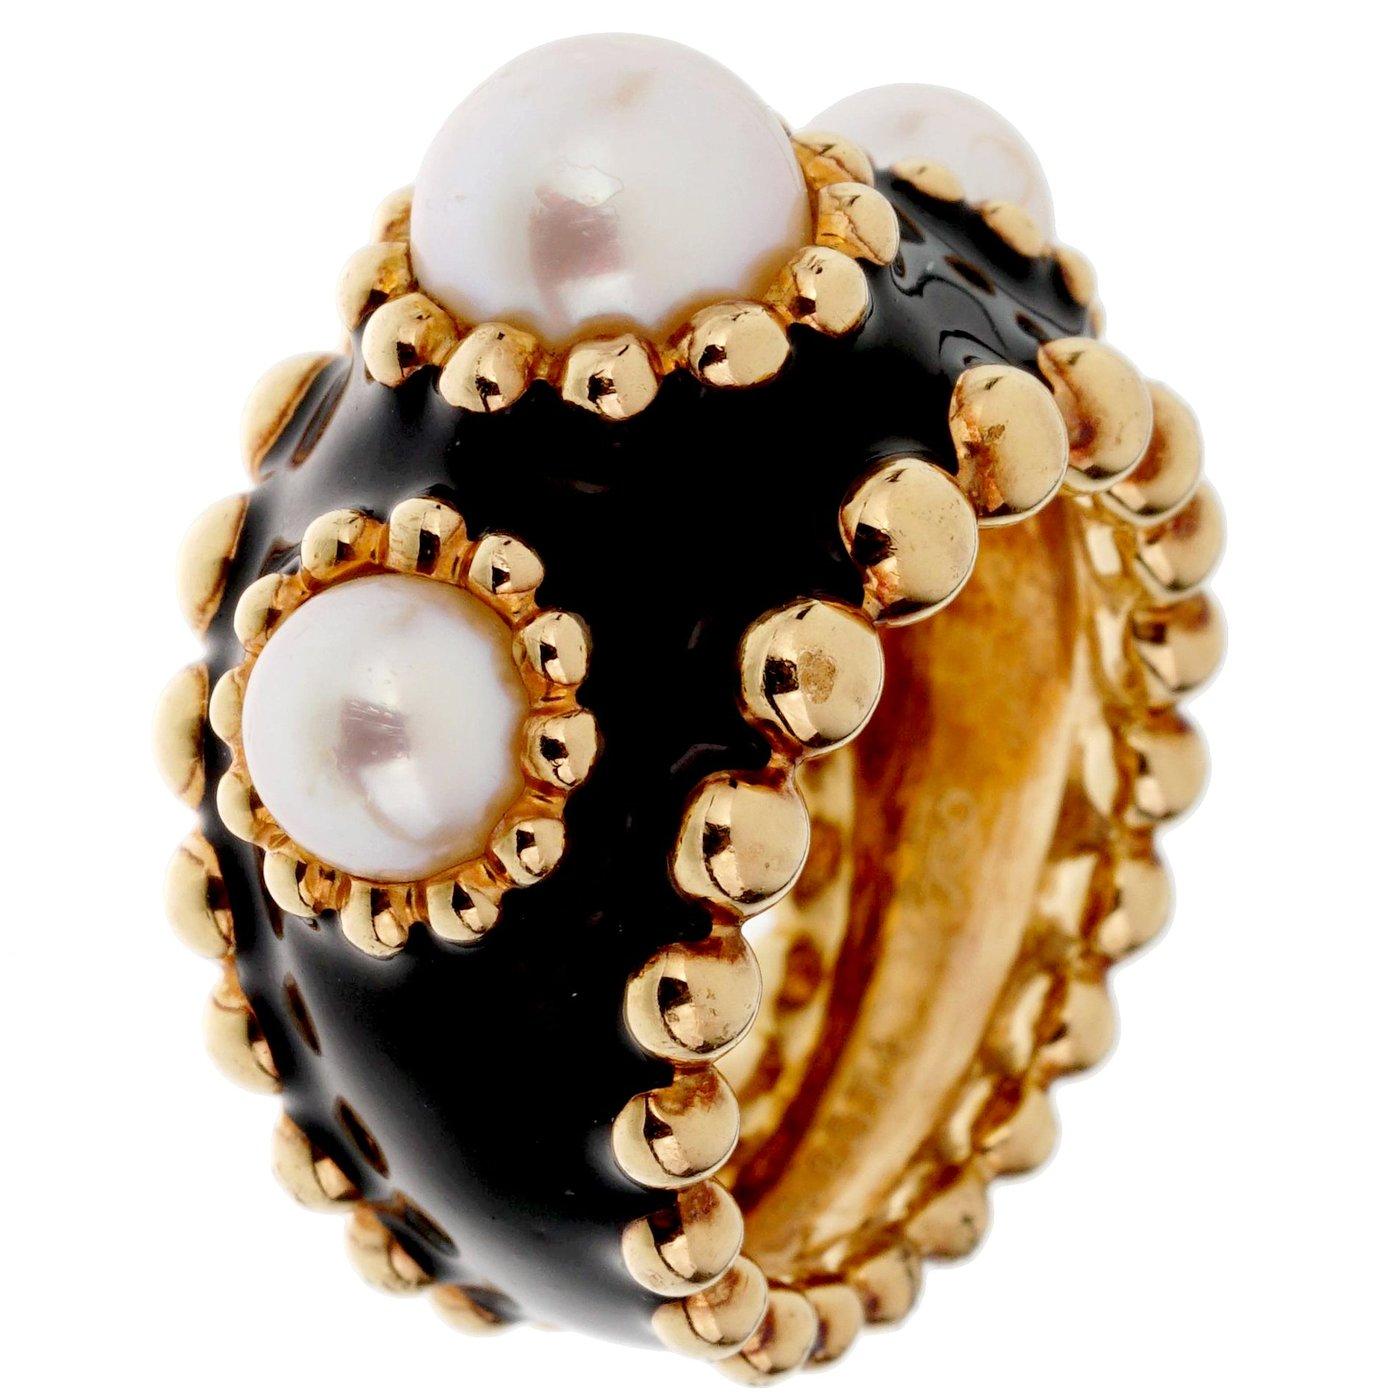 A lovely authentic Chanel ring circa 1990s showcasing 3 pearls each with a beaded row encased with black enamel in 18k yellow gold. The ring measures a size 5 3/4

